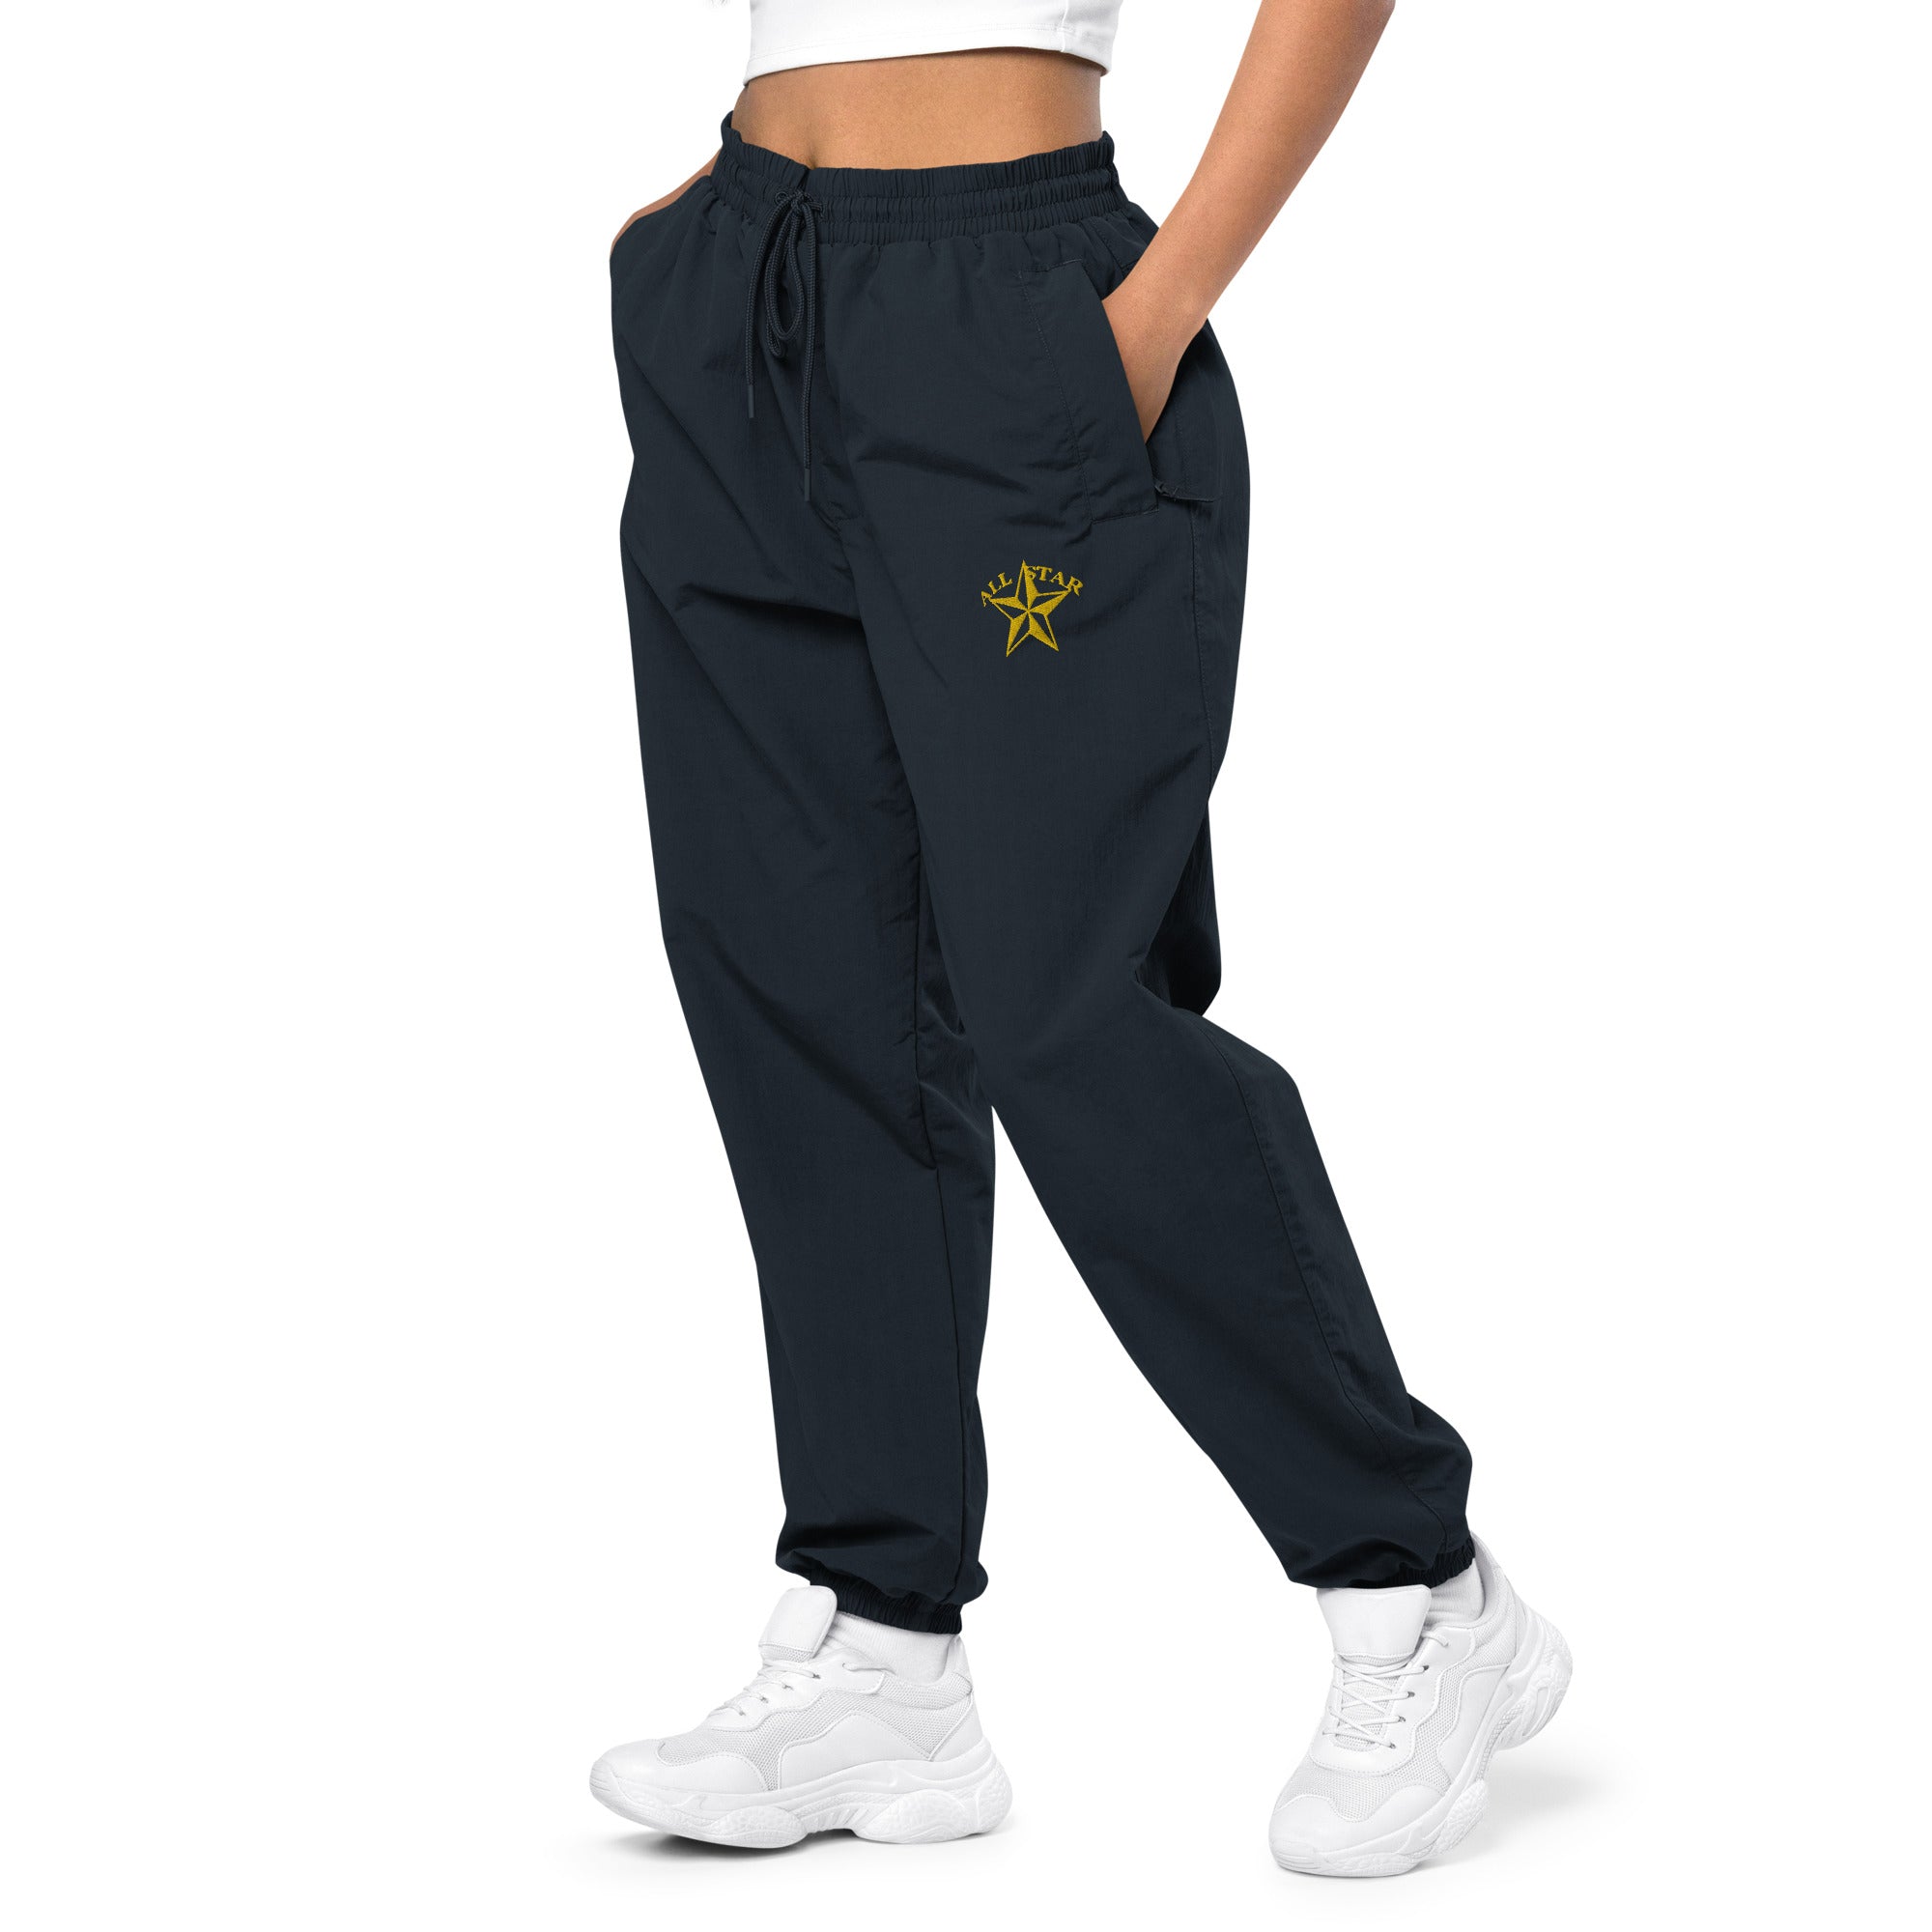 2023 new Corteiz Tracksuit Bottoms Loose sporty casual trousers sweatpants  Hot | eBay